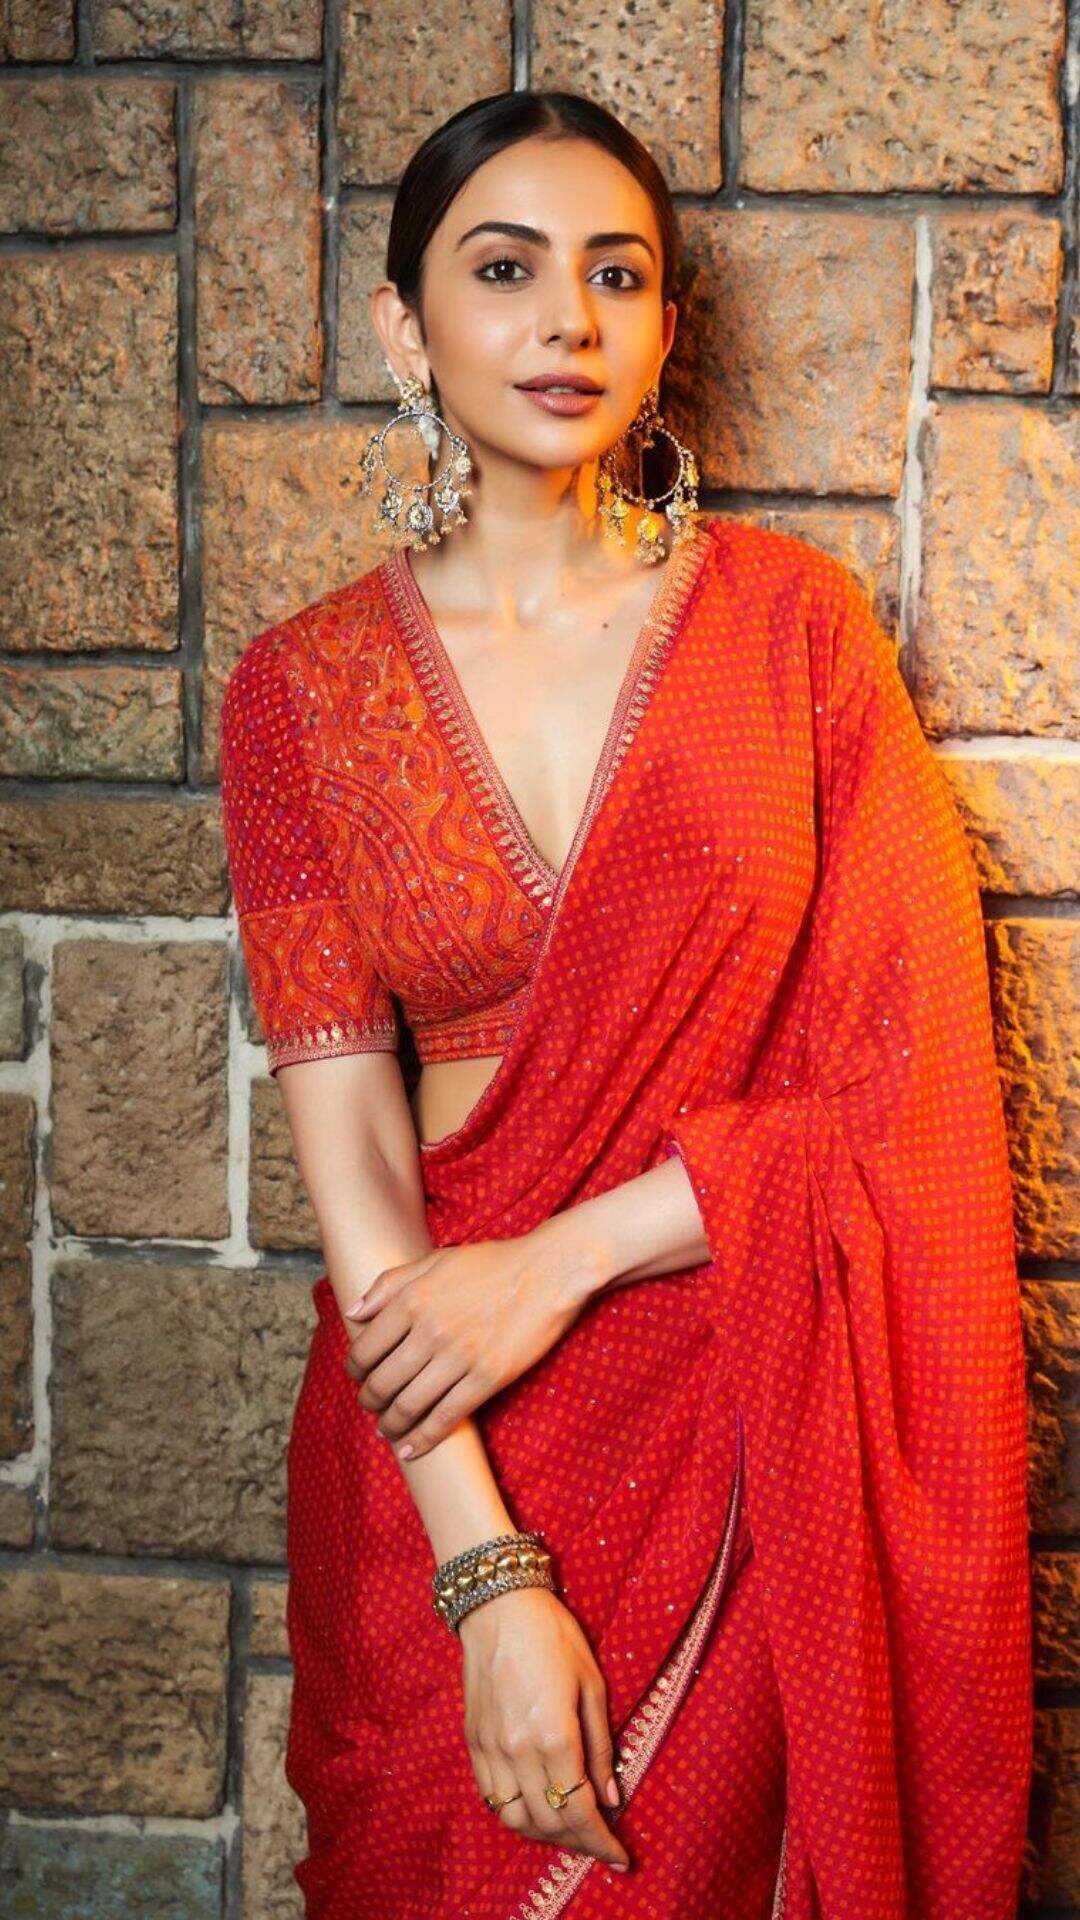 Look Hot in a Red Saree With Golden Border This Wedding Season